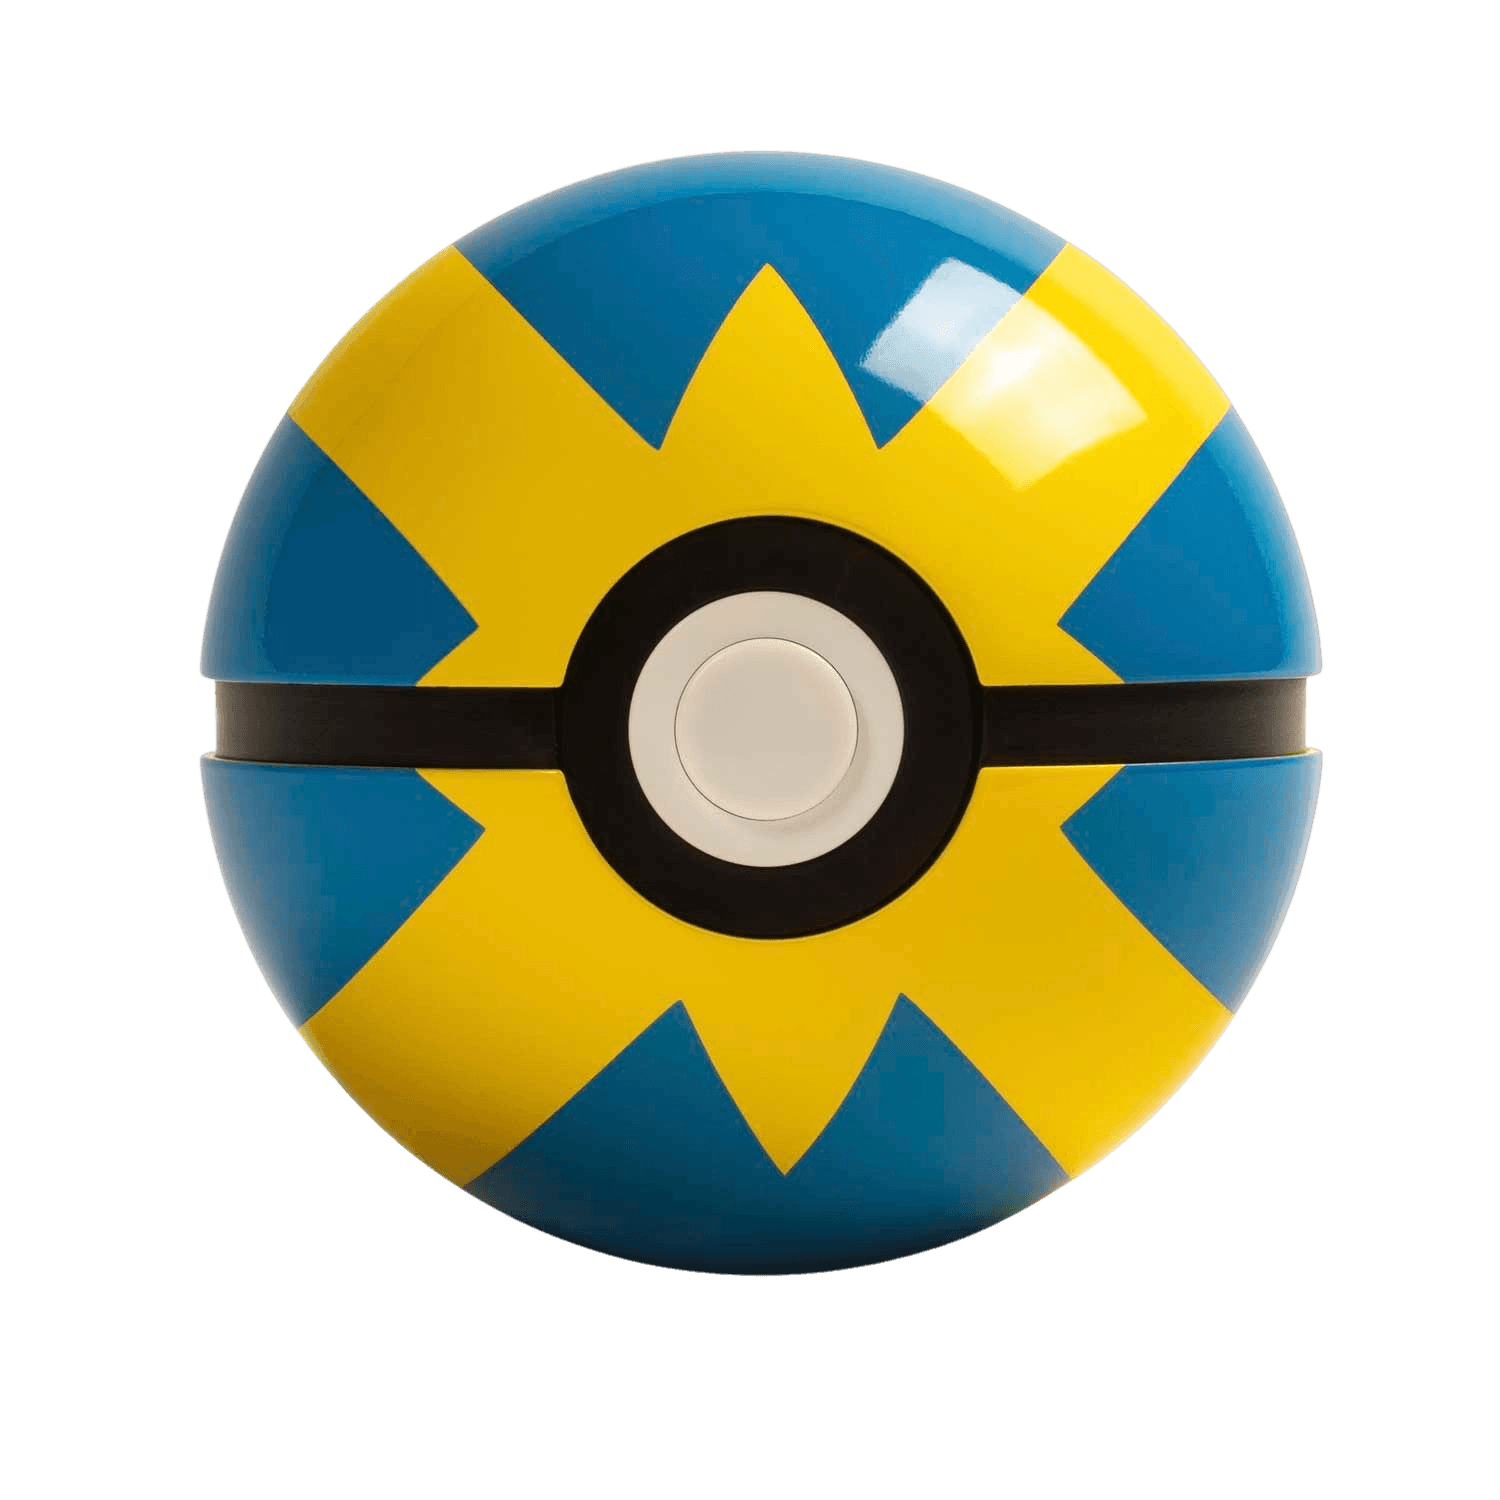 The Wand Company: Pokemon Die-Cast Quick Ball Replica - The Card Vault